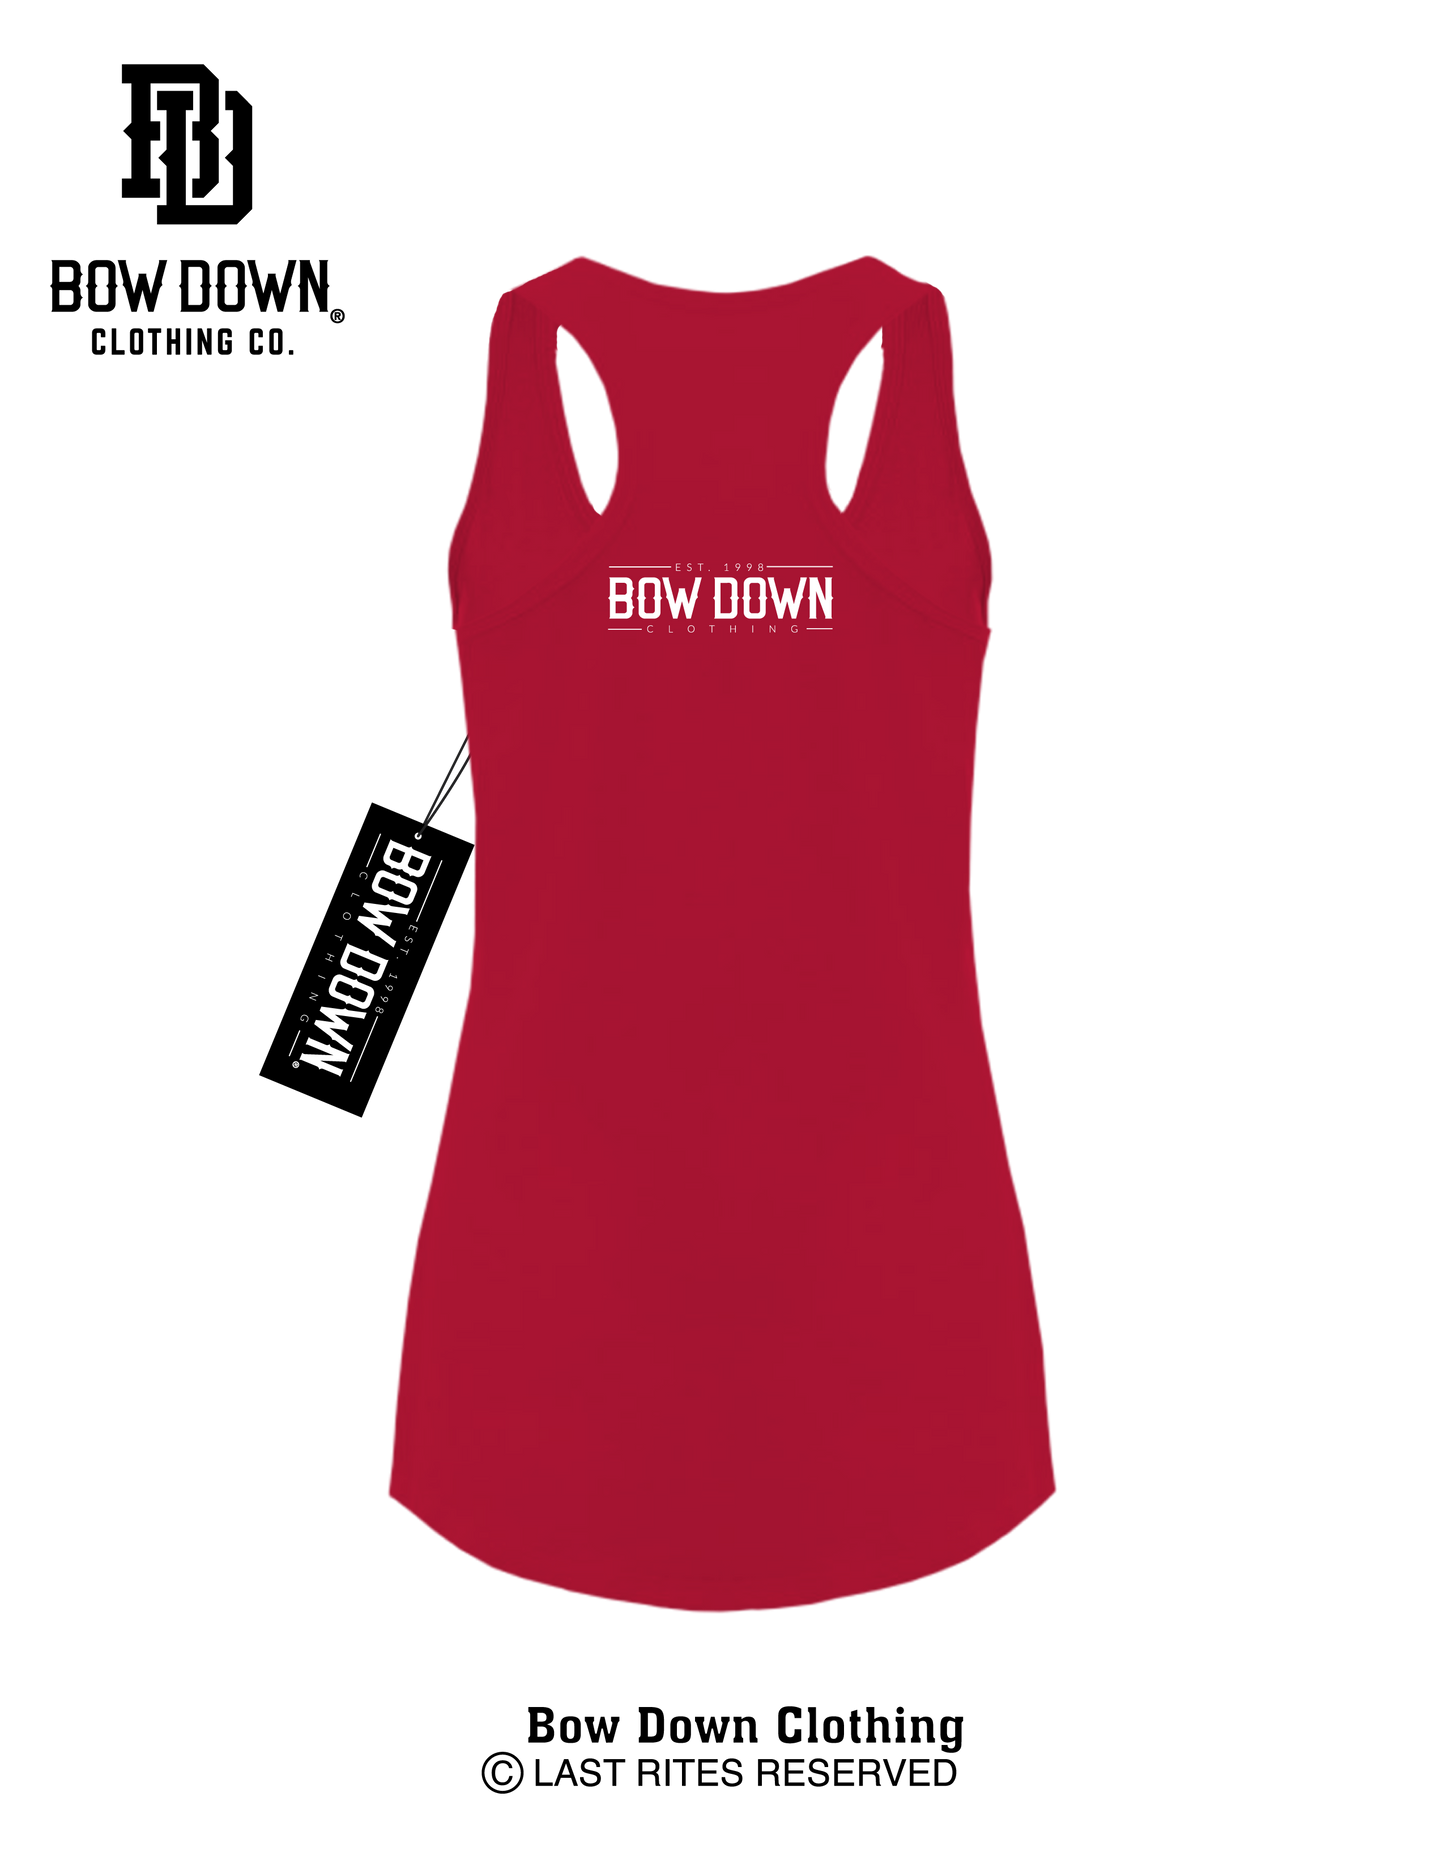 CAN'T RUSH PERFECTION WOMEN'S RACERBACK